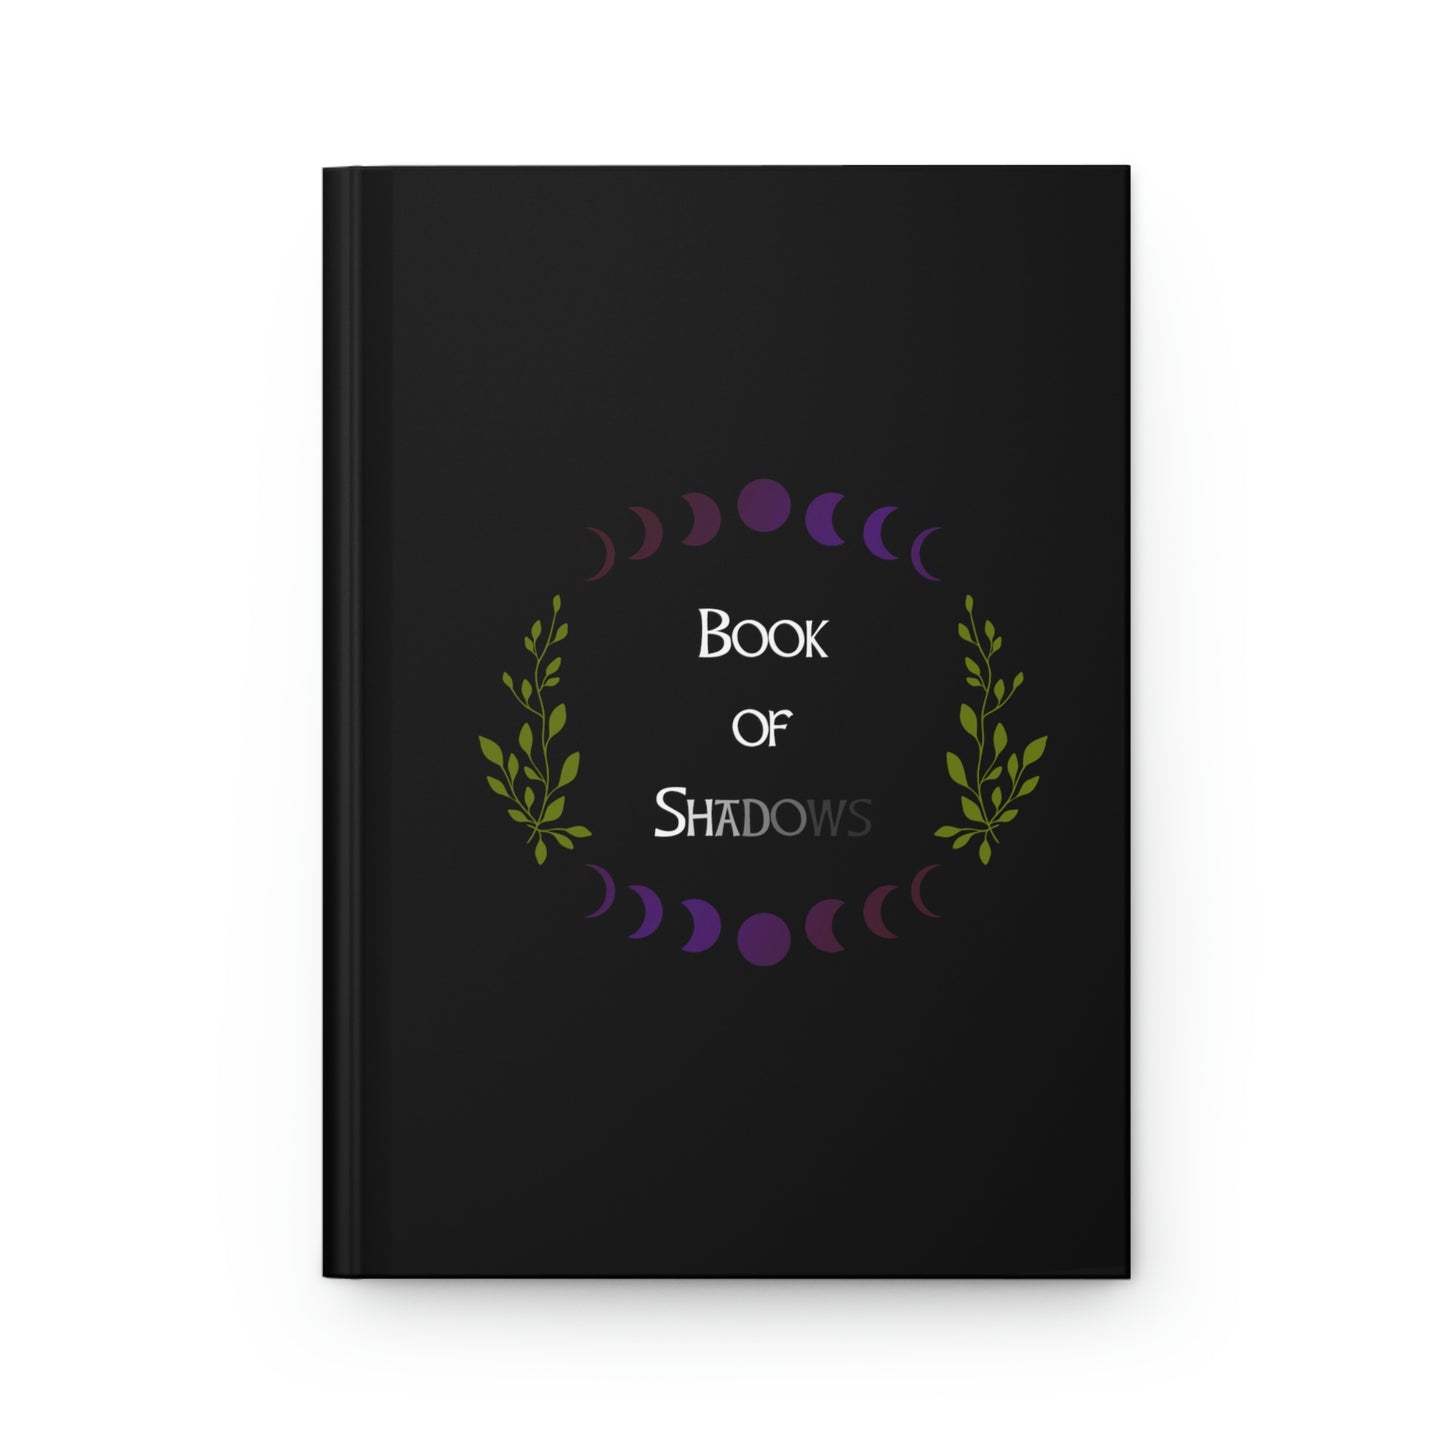 Book of Shadows - Moon  Phase & Plants - Hardcover Grimoire for Witches, Pagans, Wiccans - 150 lined page notebook